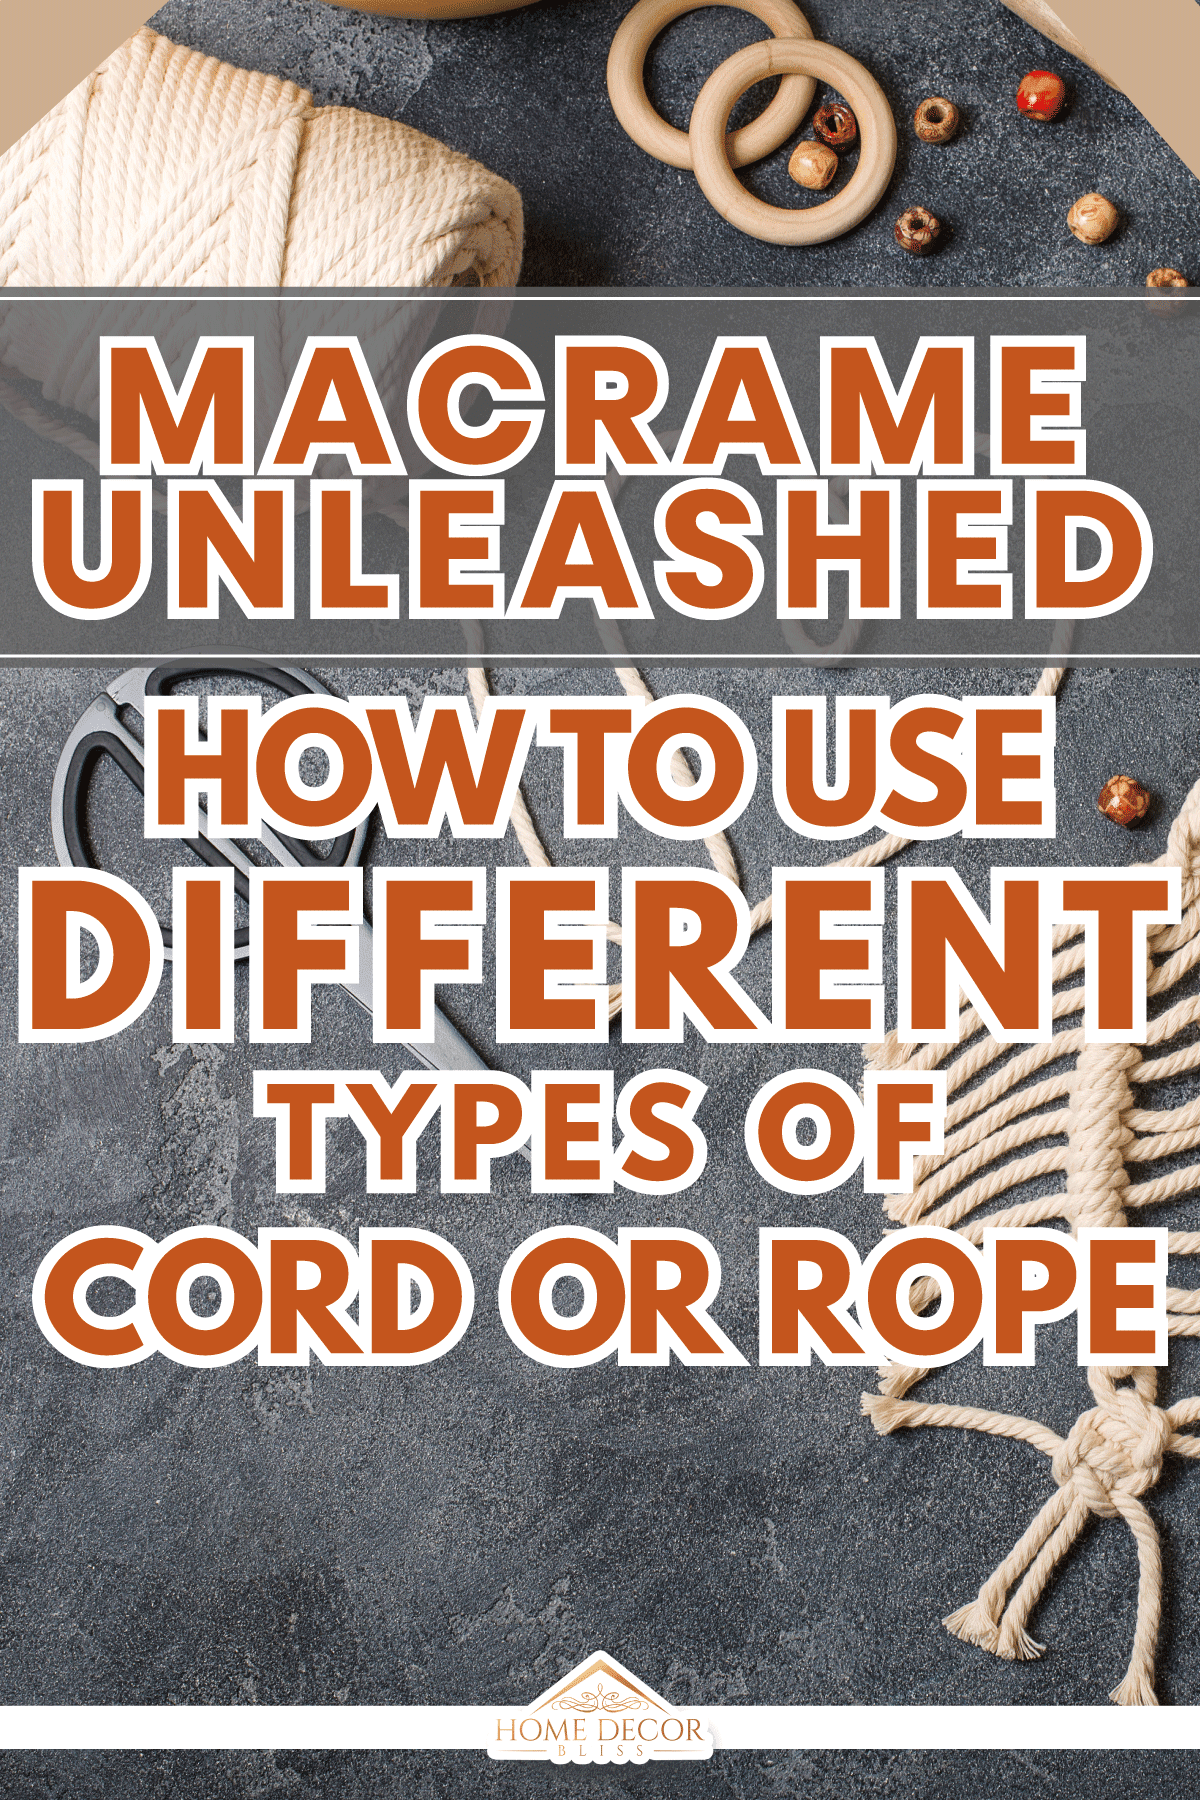 Macrame, handmade macrame for home decoration, Macrame Unleashed: How To Use Different Types Of Cord Or Rope